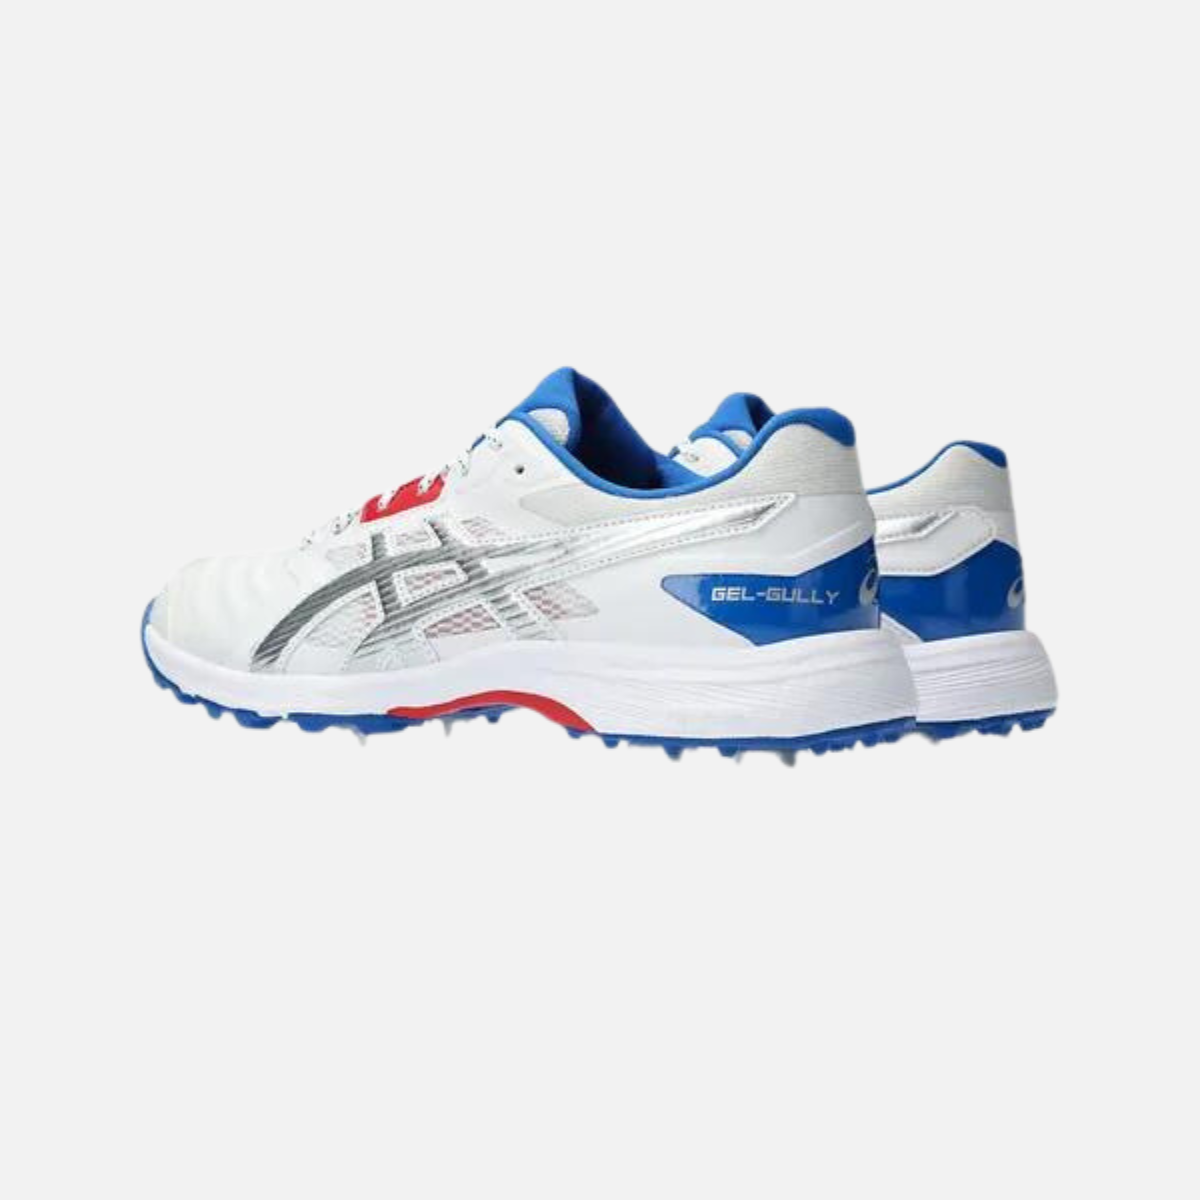 Asics Gel-Gully 7 Men's Cricket Shoes -White/Pure Silver